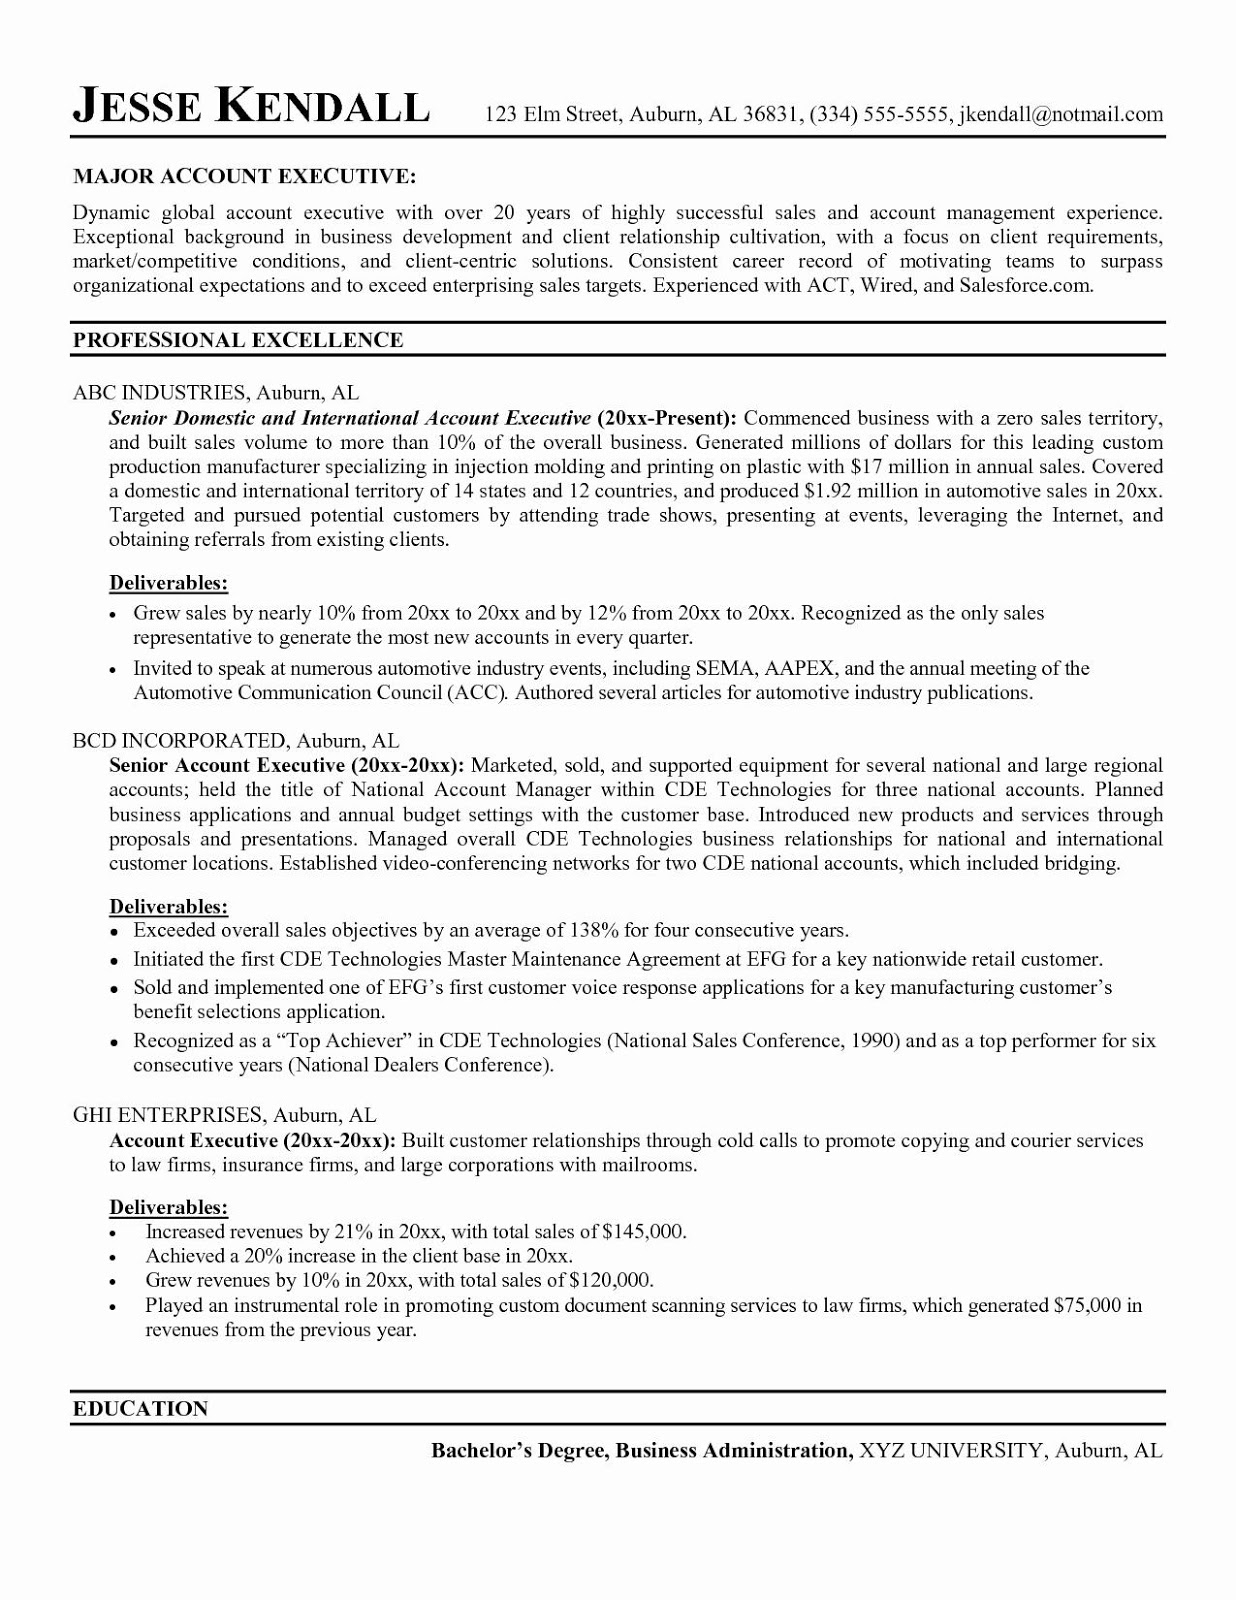 Account Executive Sample Resume Examples 10 – Lebenslauf Vorlage With Regard To National Account Manager Job Description Template